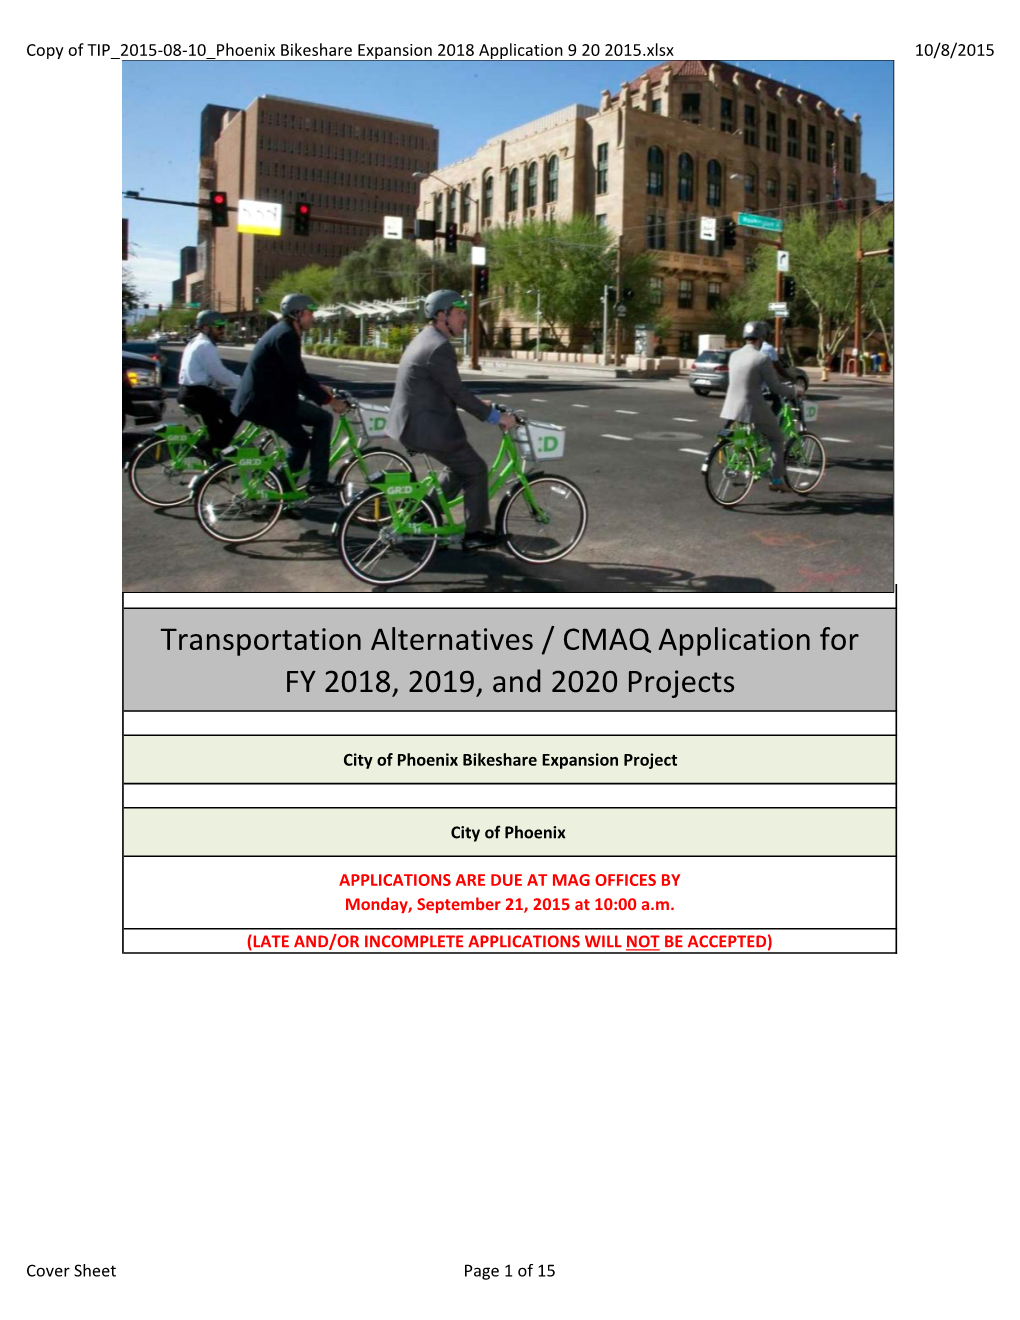 Transportation Alternatives / CMAQ Application for FY 2018, 2019, and 2020 Projects